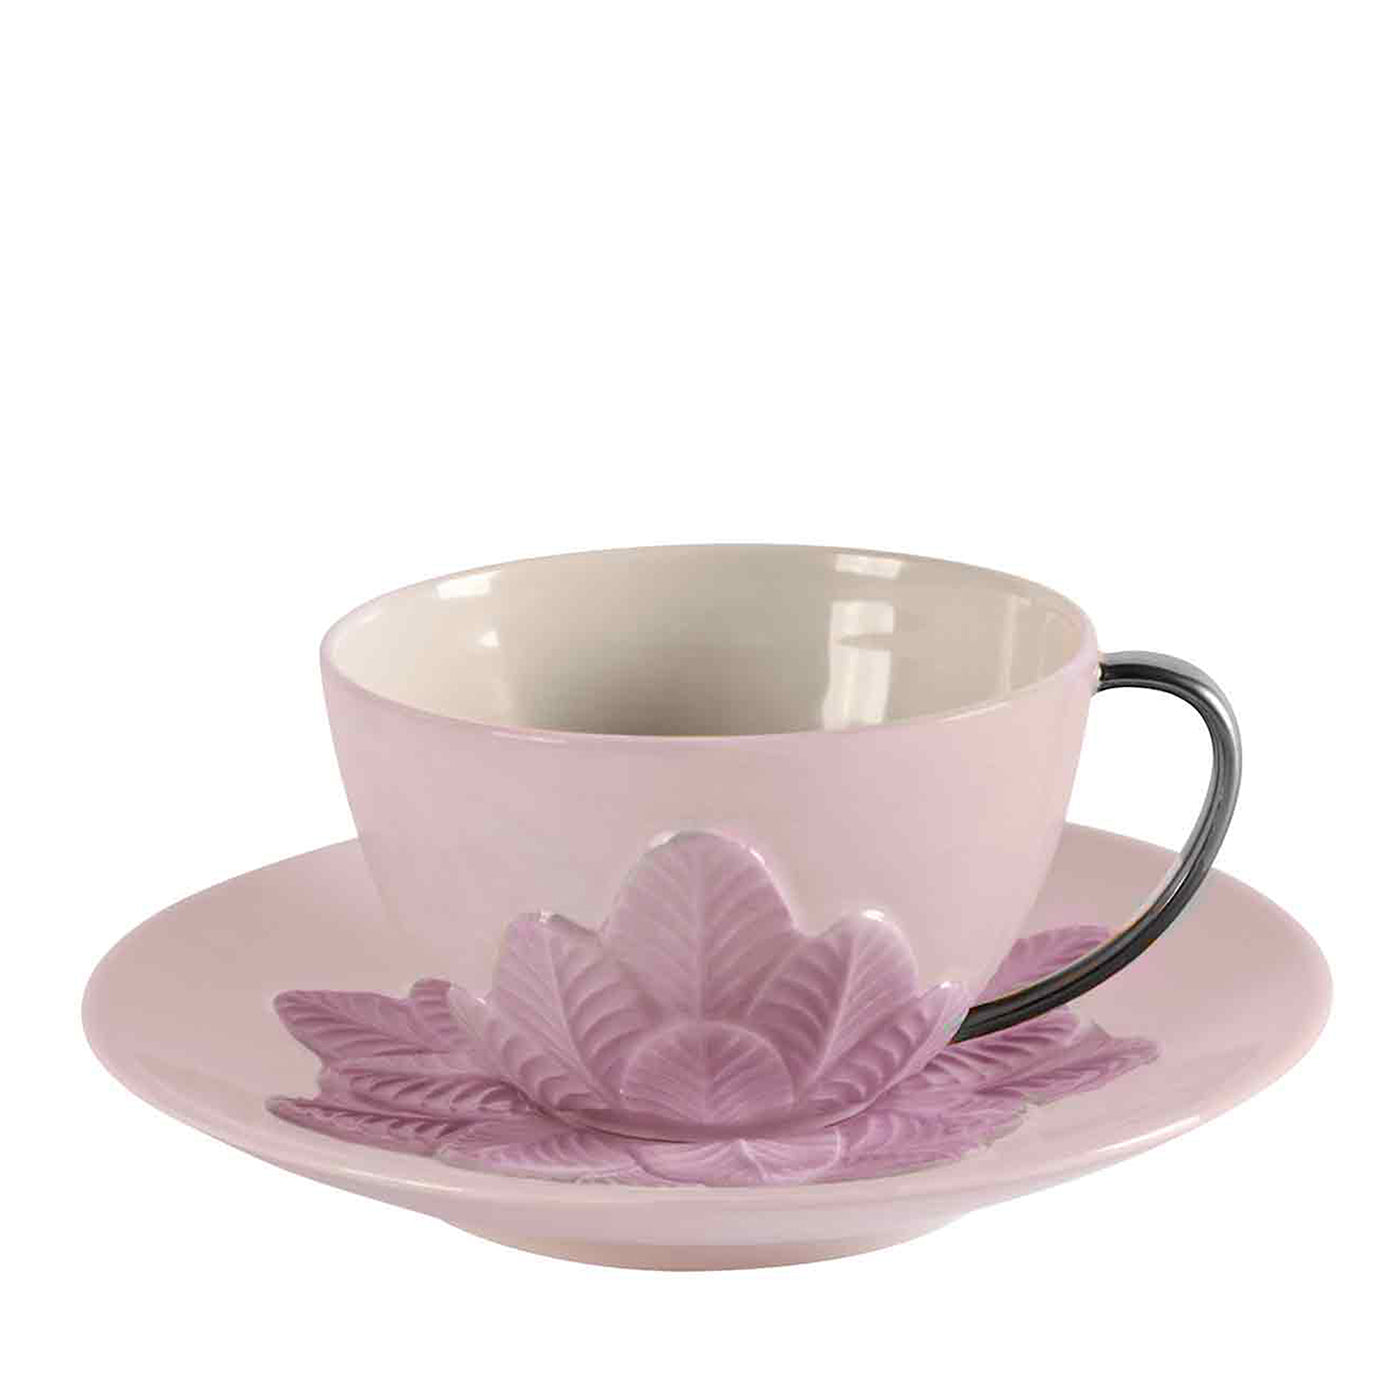 PEACOCK TEA CUP - PINK AND SILVER - Main view